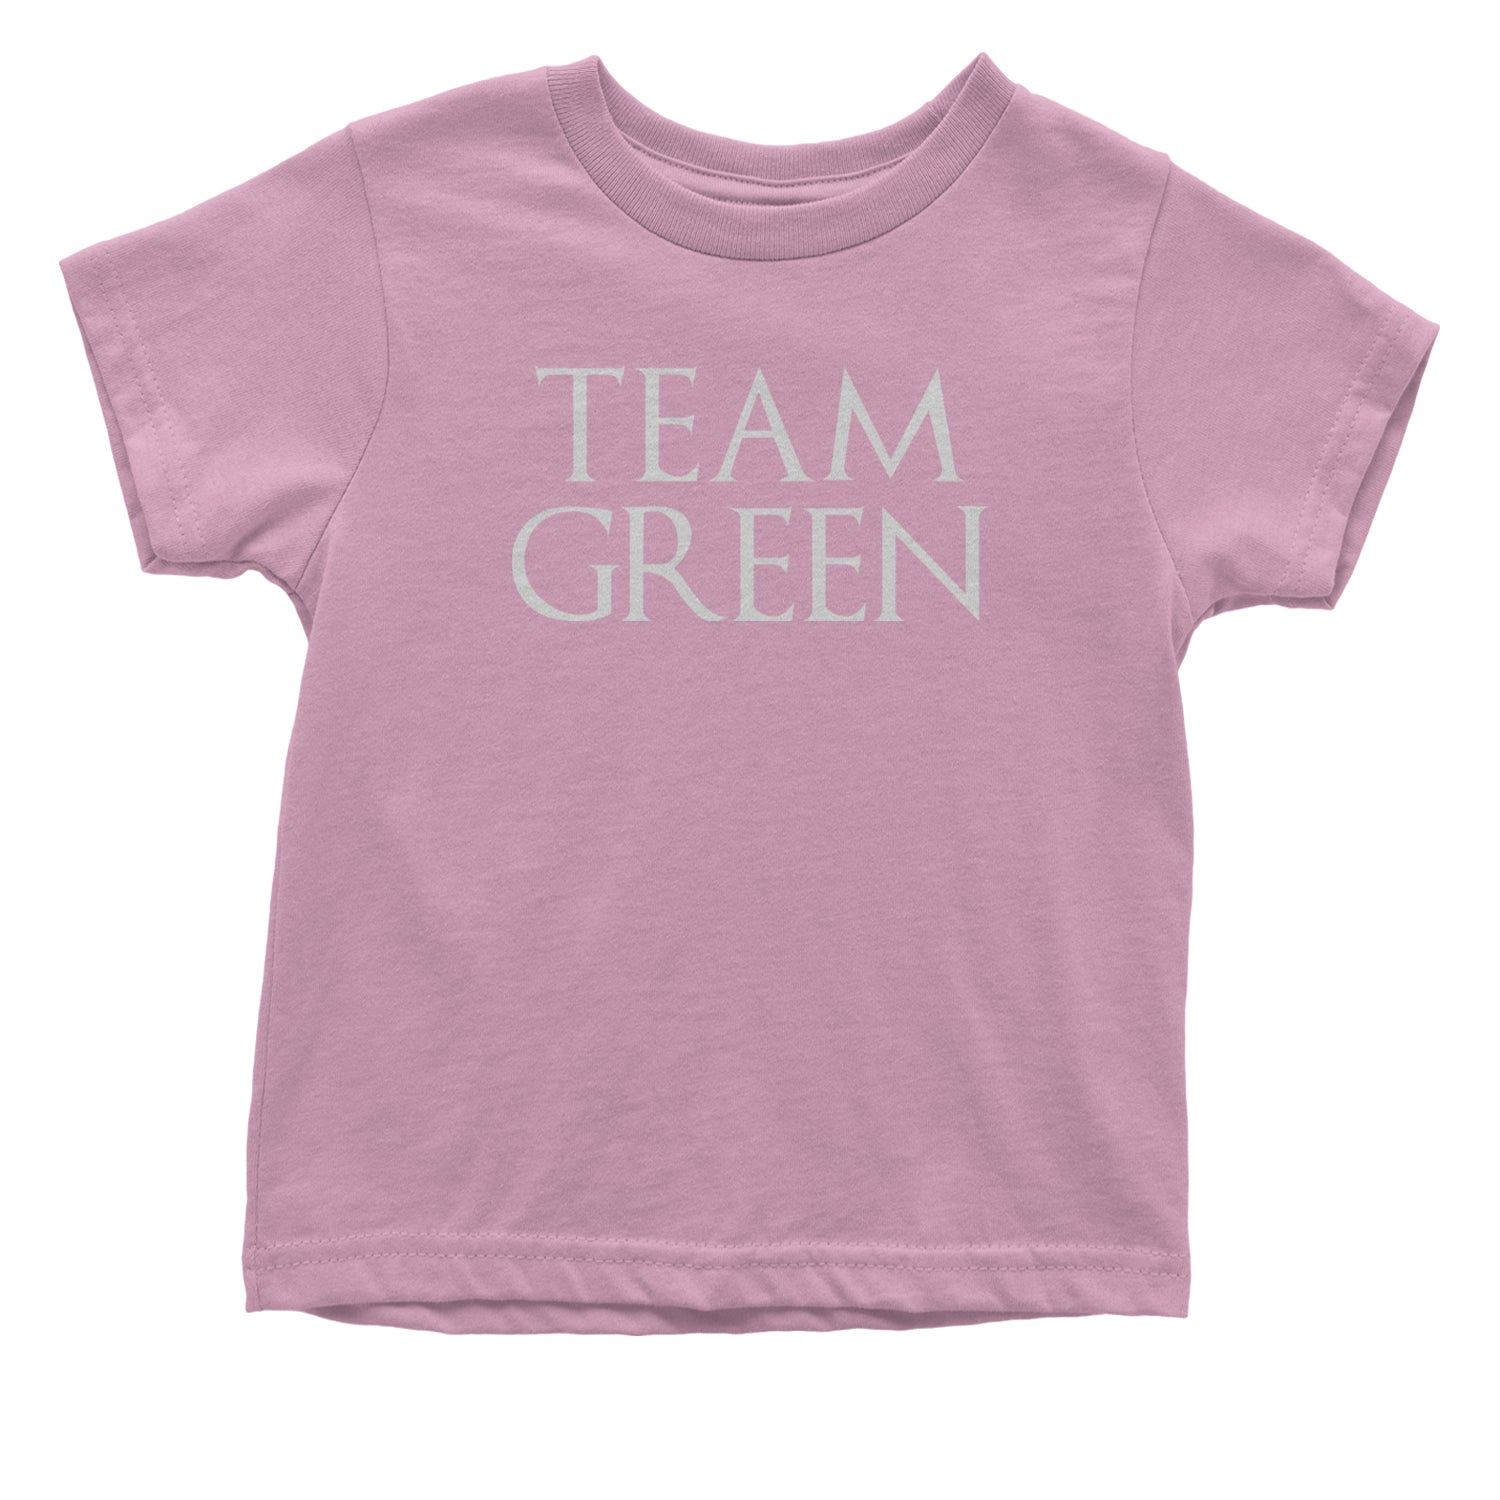 Team Green HotD Infant One-Piece Romper Bodysuit and Toddler T-shirt alicent, hightower, rhaneyra, targaryen by Expression Tees